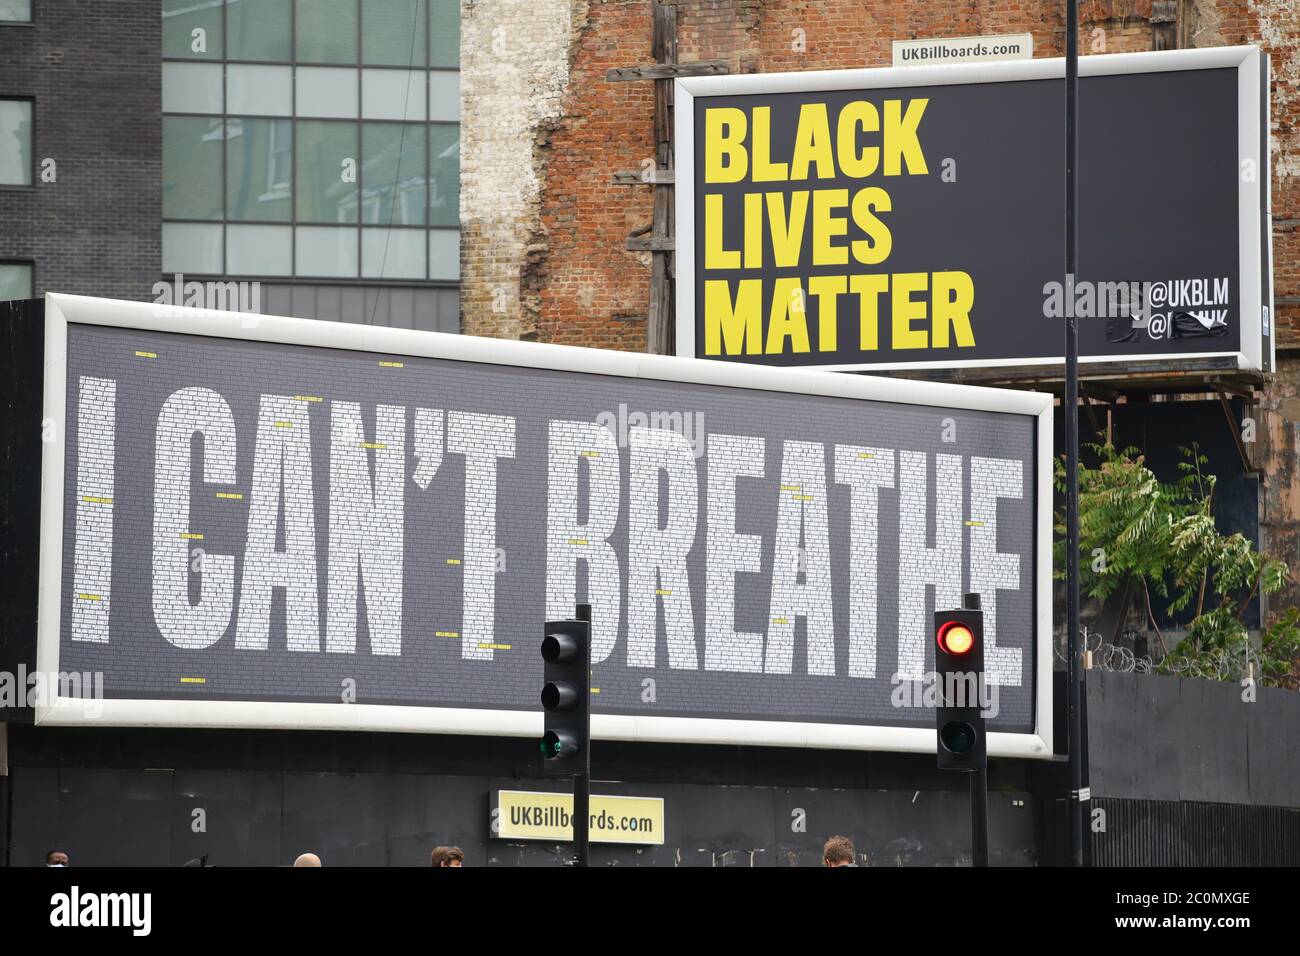 The Black Lives Matter UK (BLMUK) billboard on Westminster Bridge Road, London, which lists more than 3000 names of people who have died in police custody, prisons, immigration detention centres and in racist attacks in the UK, as well as those who have died as the result of coronavirus. The billboard has been erected by BLMUK, in collaboration with the United Families and Friends Campaign, Justice for Belly, Justice for Shukri, Migrants Organise and the Grenfell Estate. Stock Photo